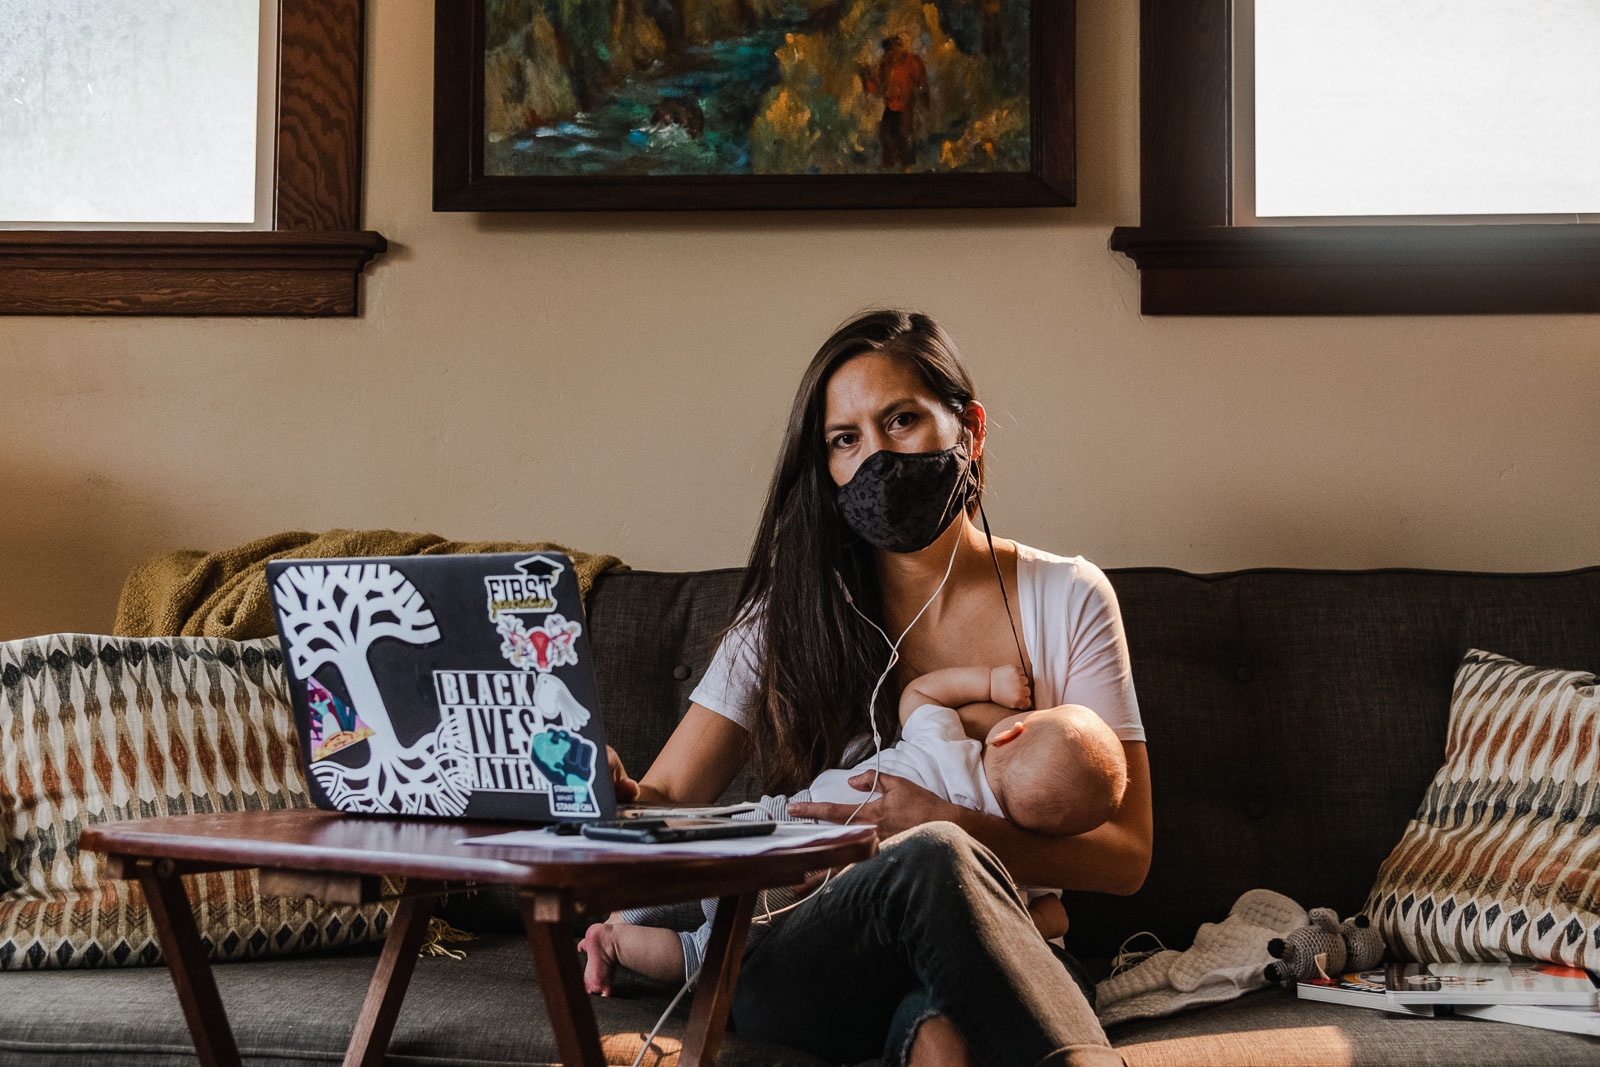 A mother breastfeeds her newborn baby while working at home in Oakland, CA